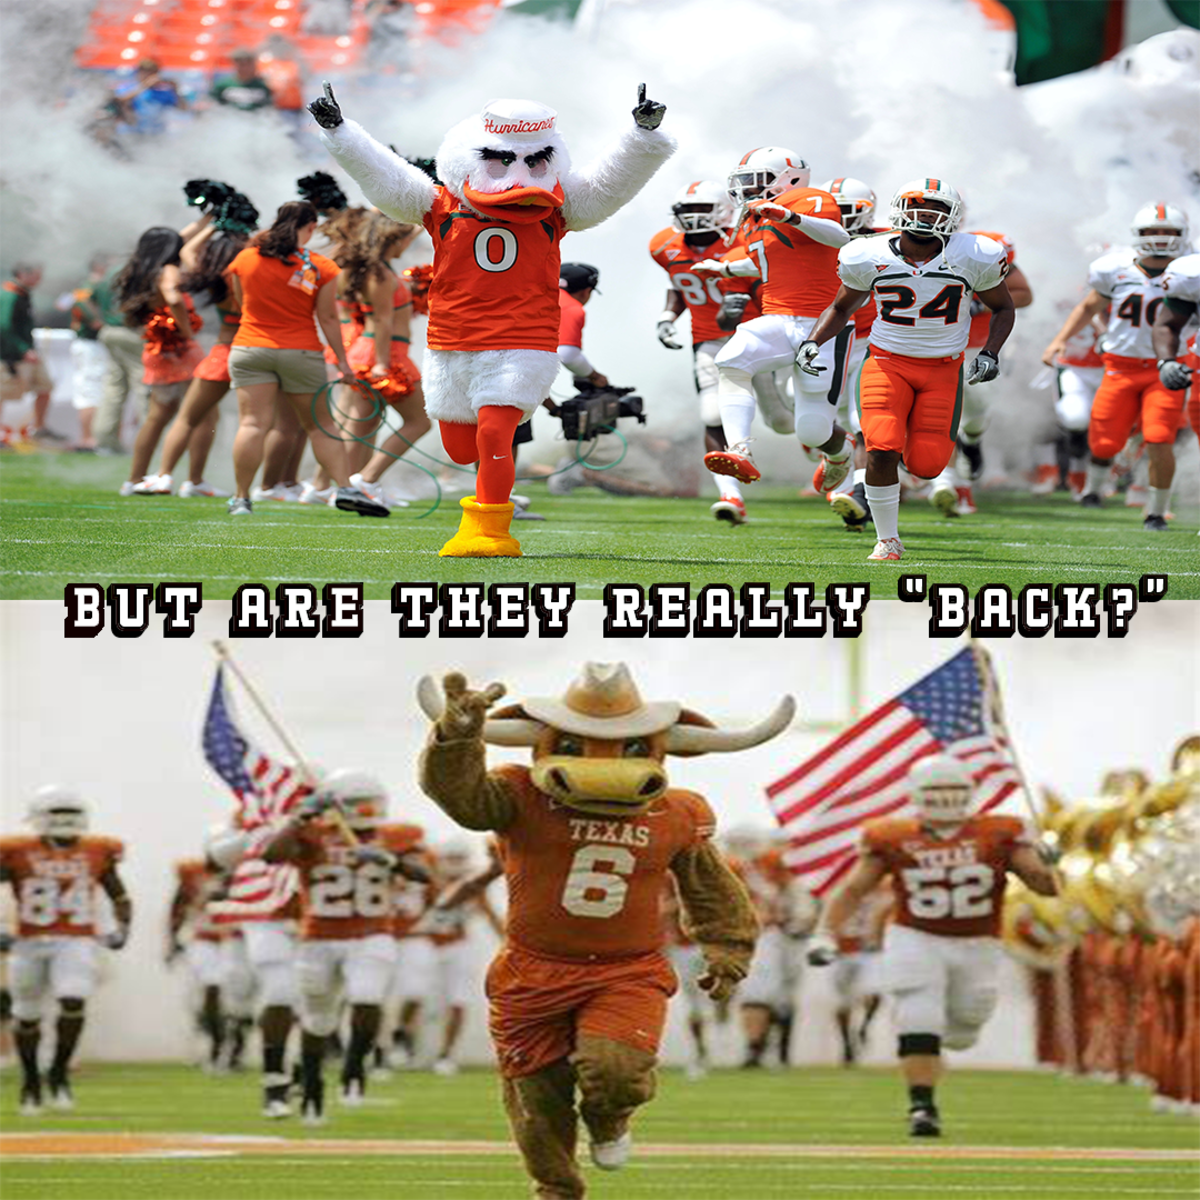 Can Miami (FL) and Texas finally "be back?"